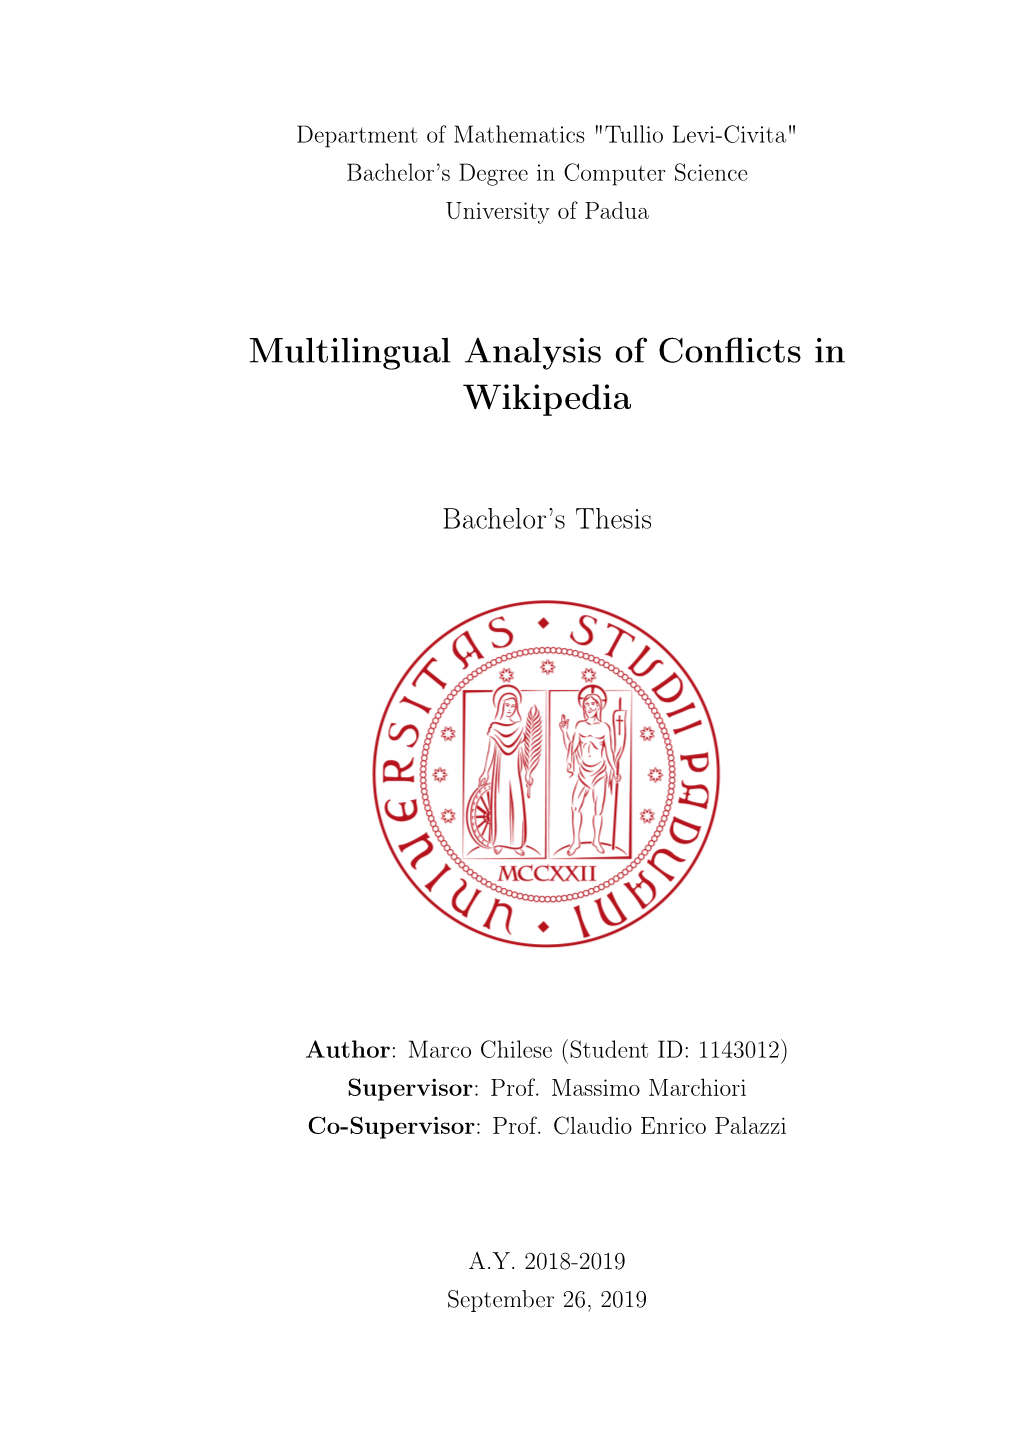 Multilingual Analysis of Conflicts in Wikipedia